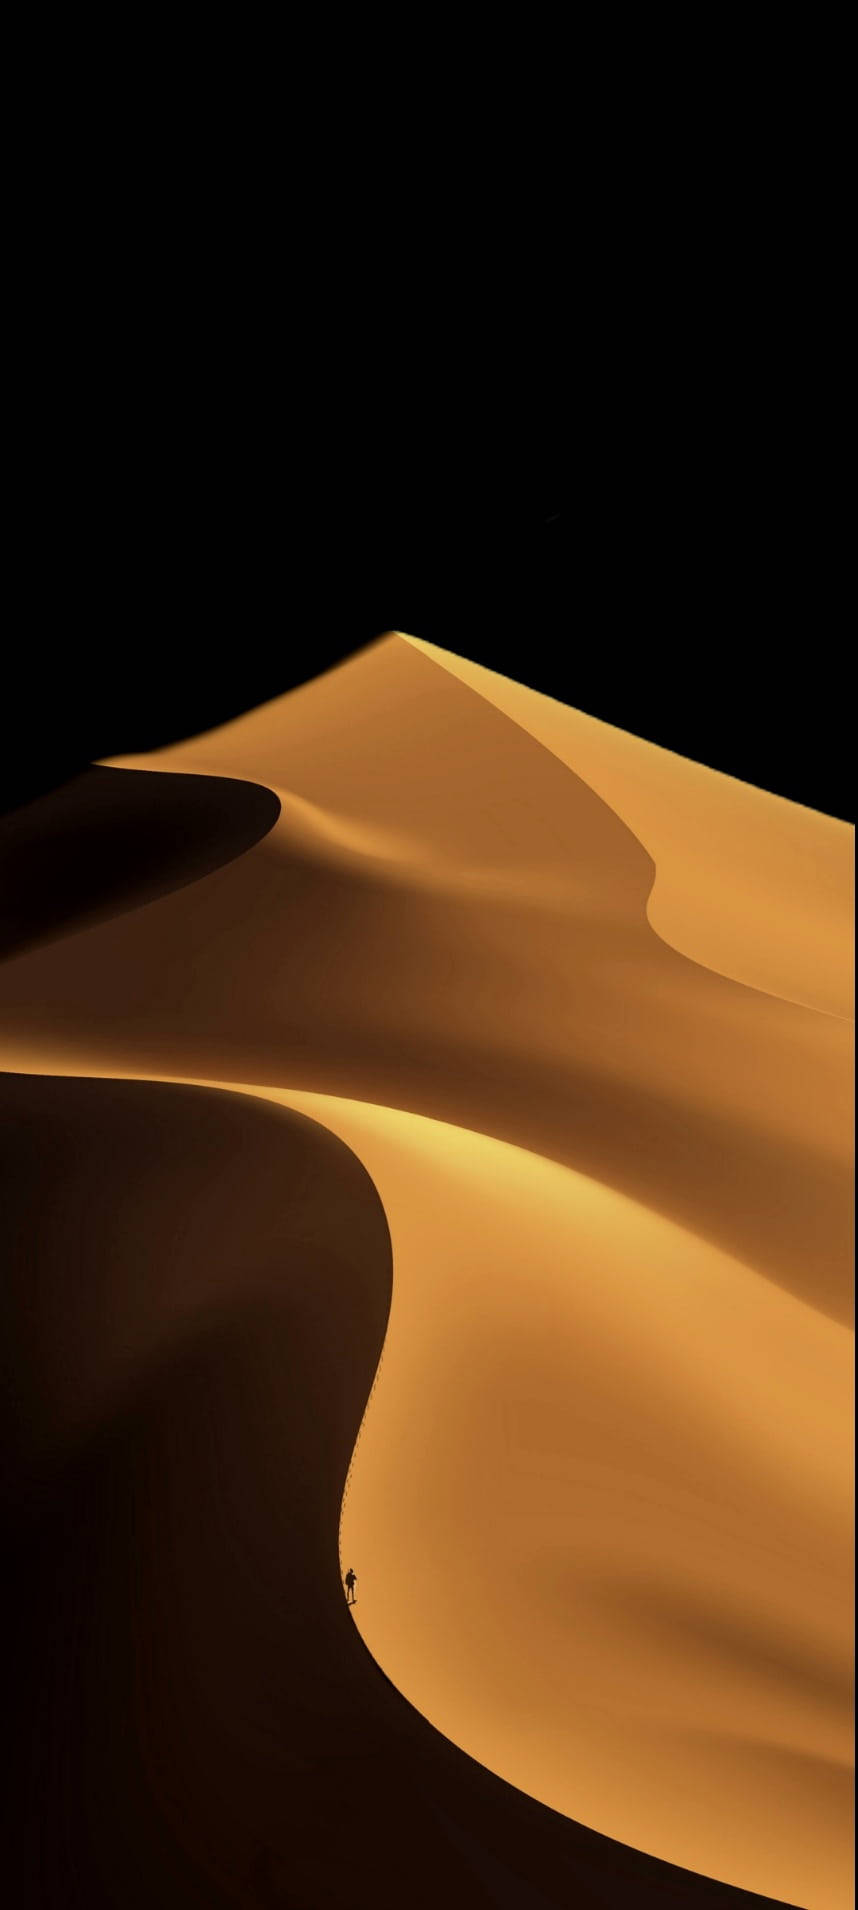 Dunes Black And Gold Iphone Wallpaper